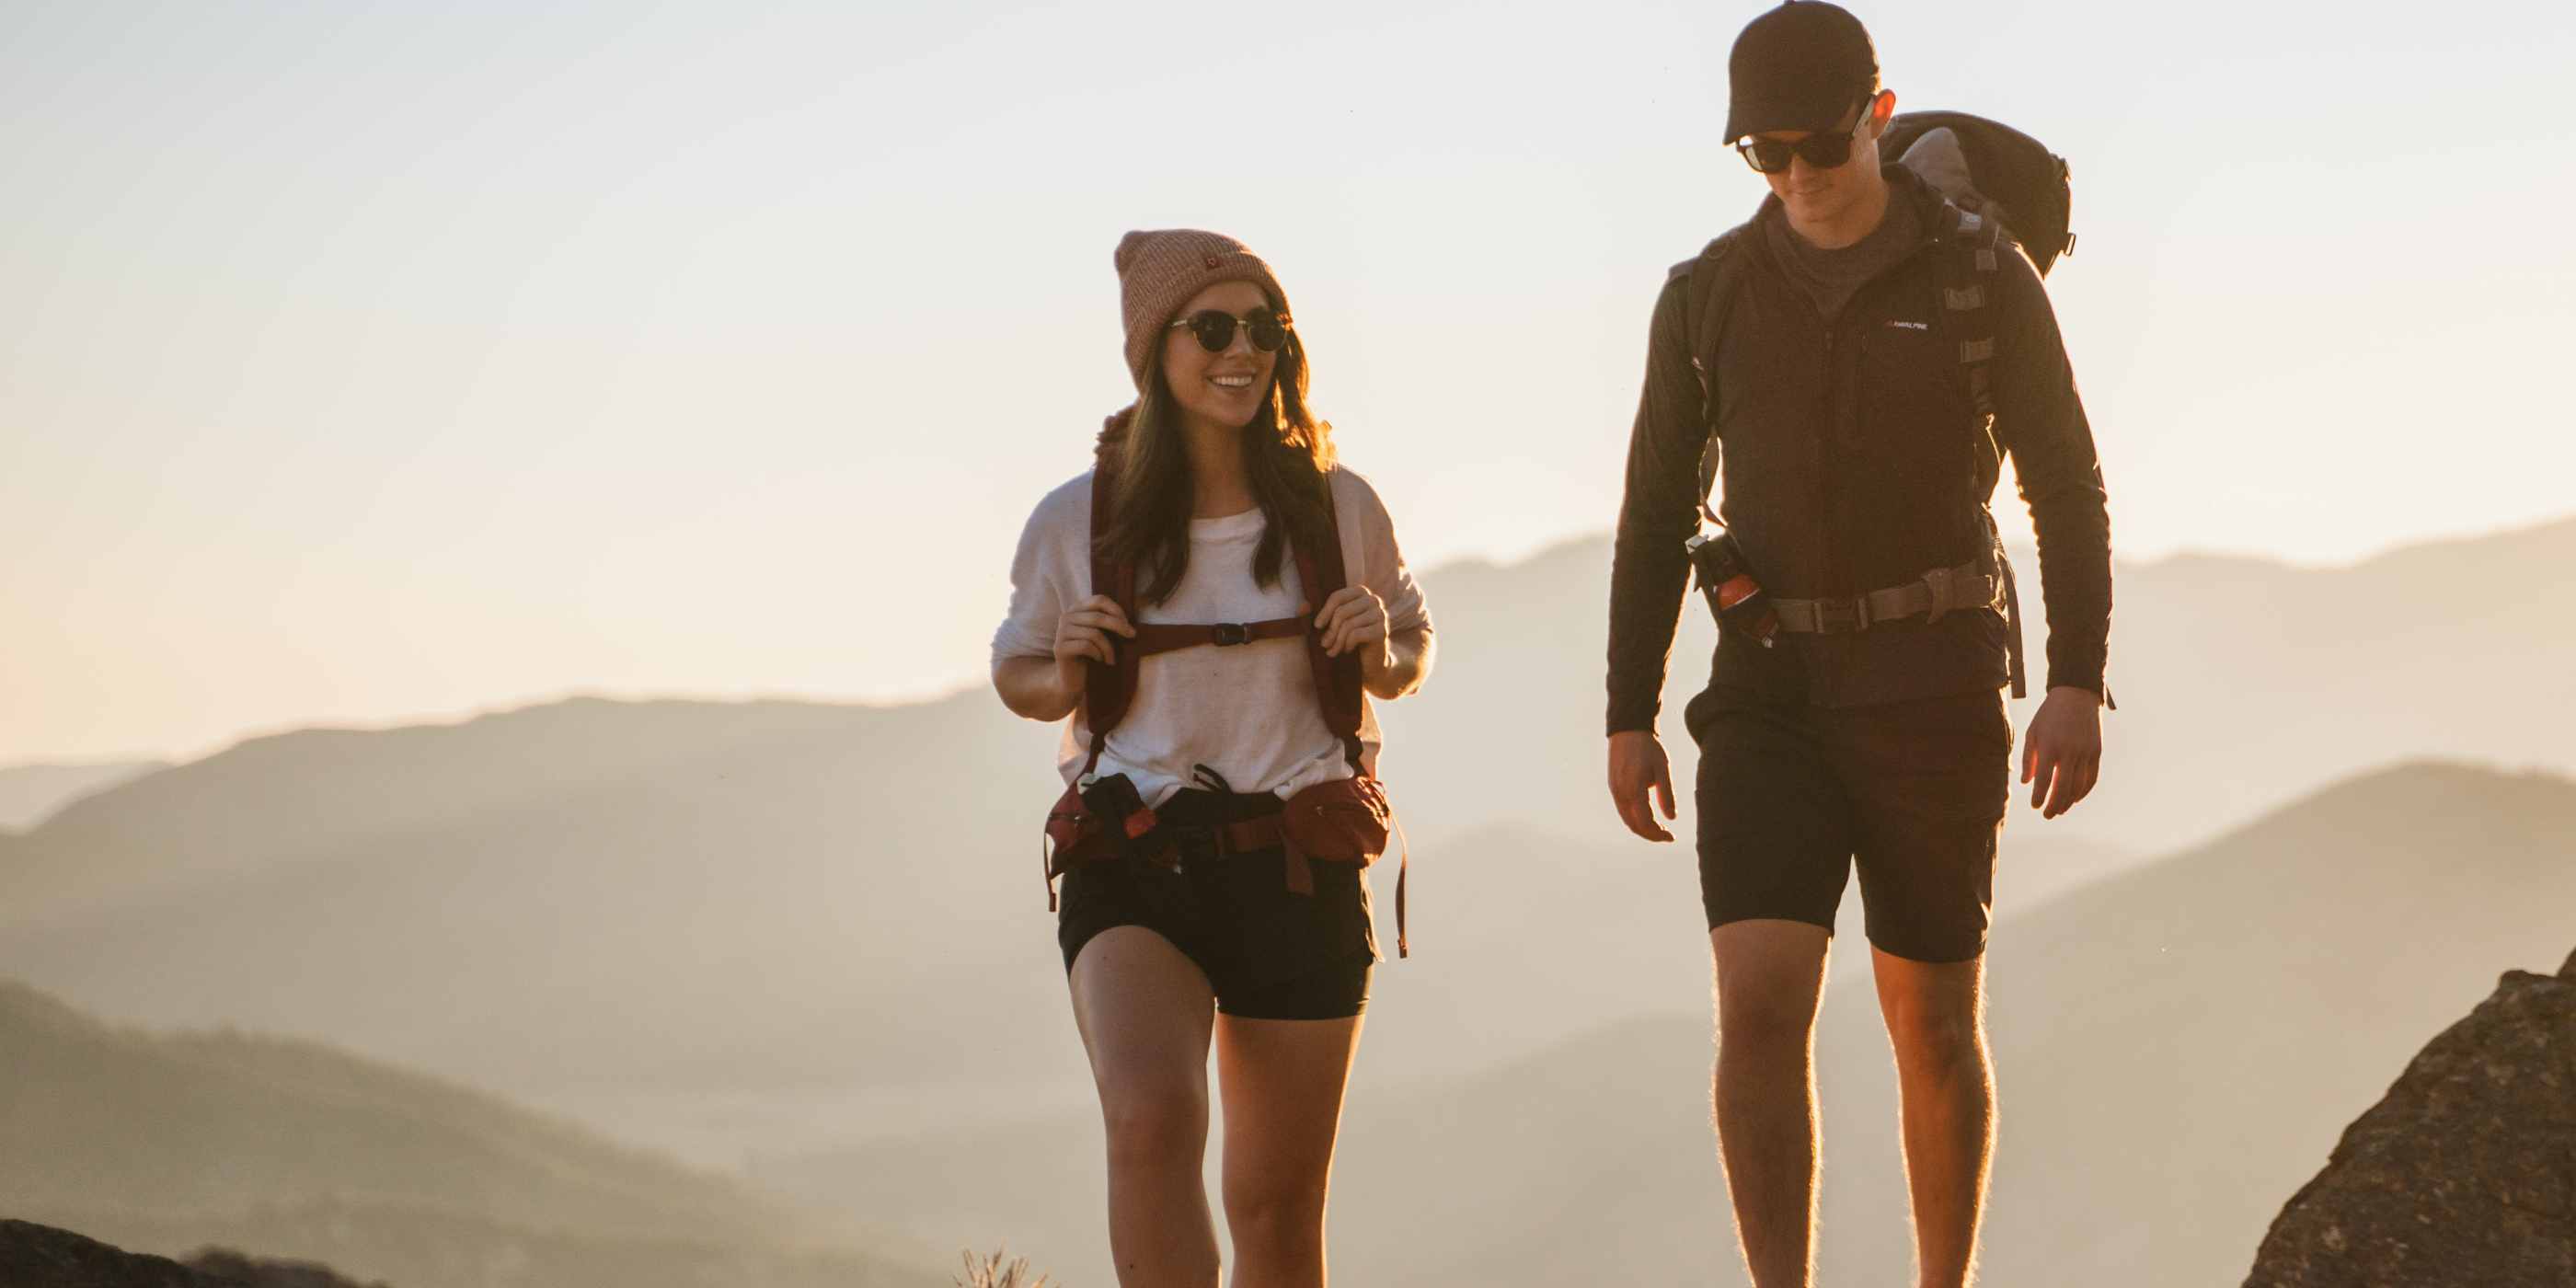 Two hikers carrying bear spray on their hips.